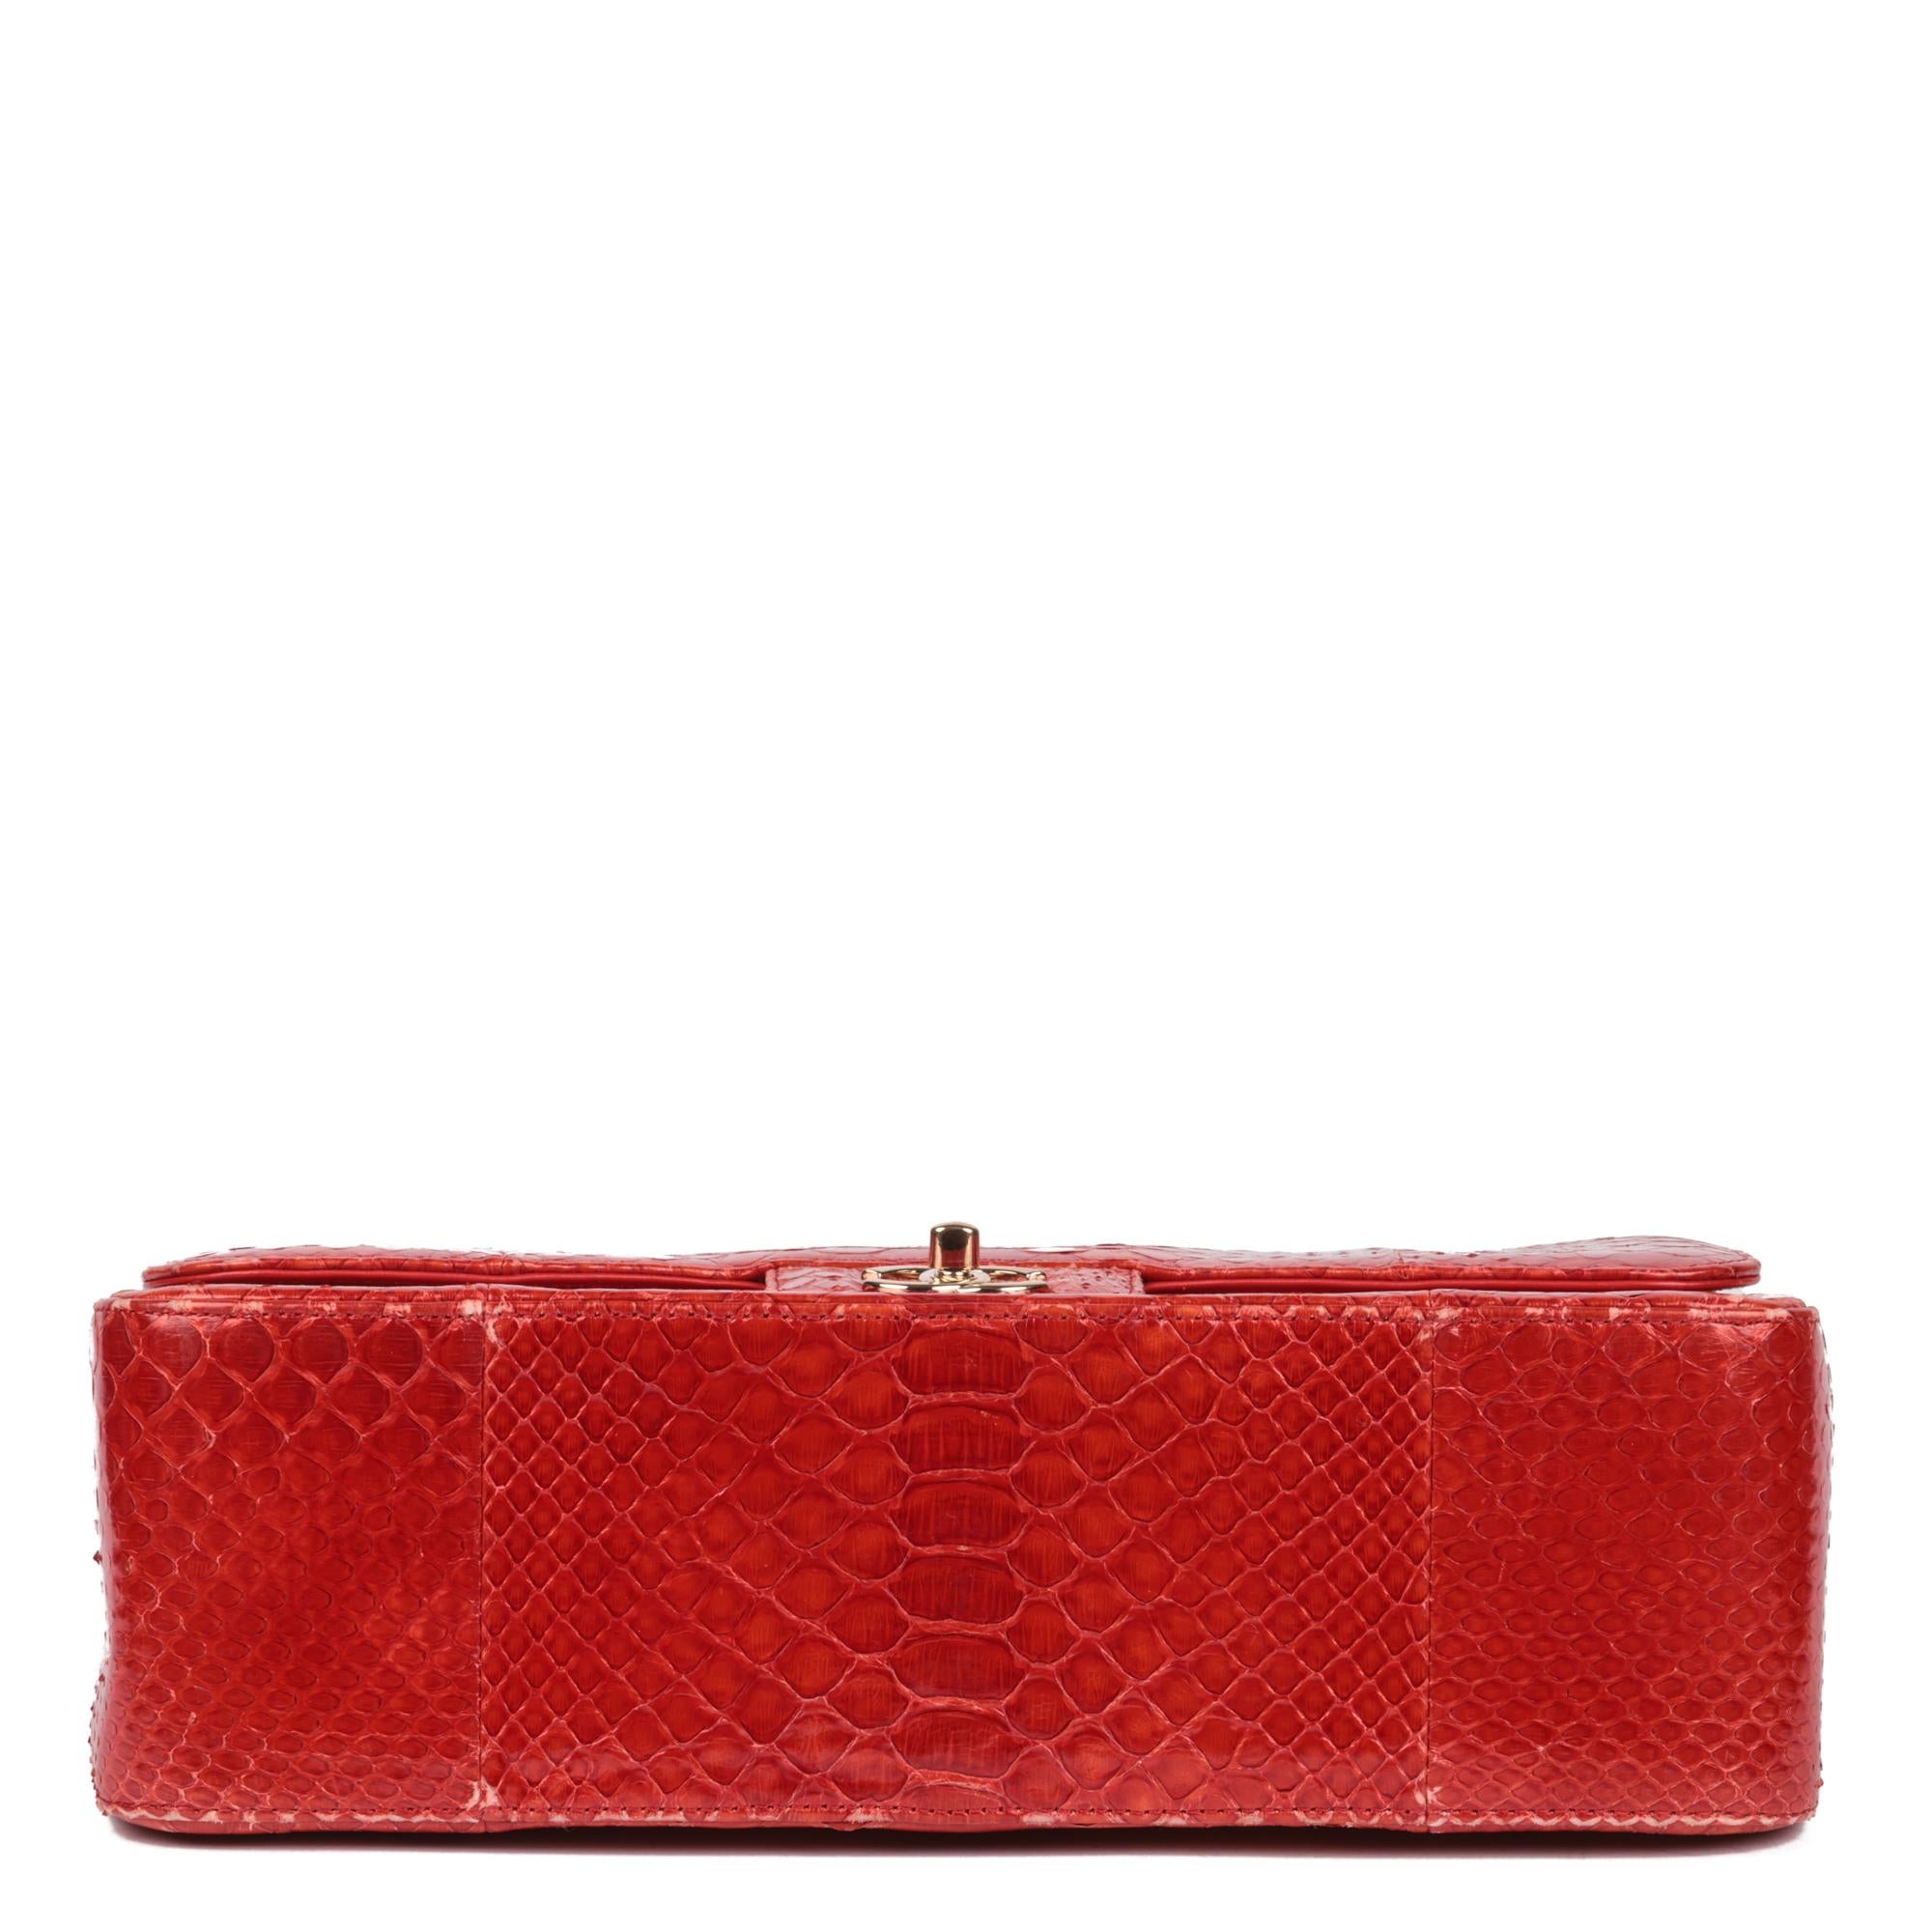 CHANEL Red Python Leather Jumbo Classic Double Flap Bag  1